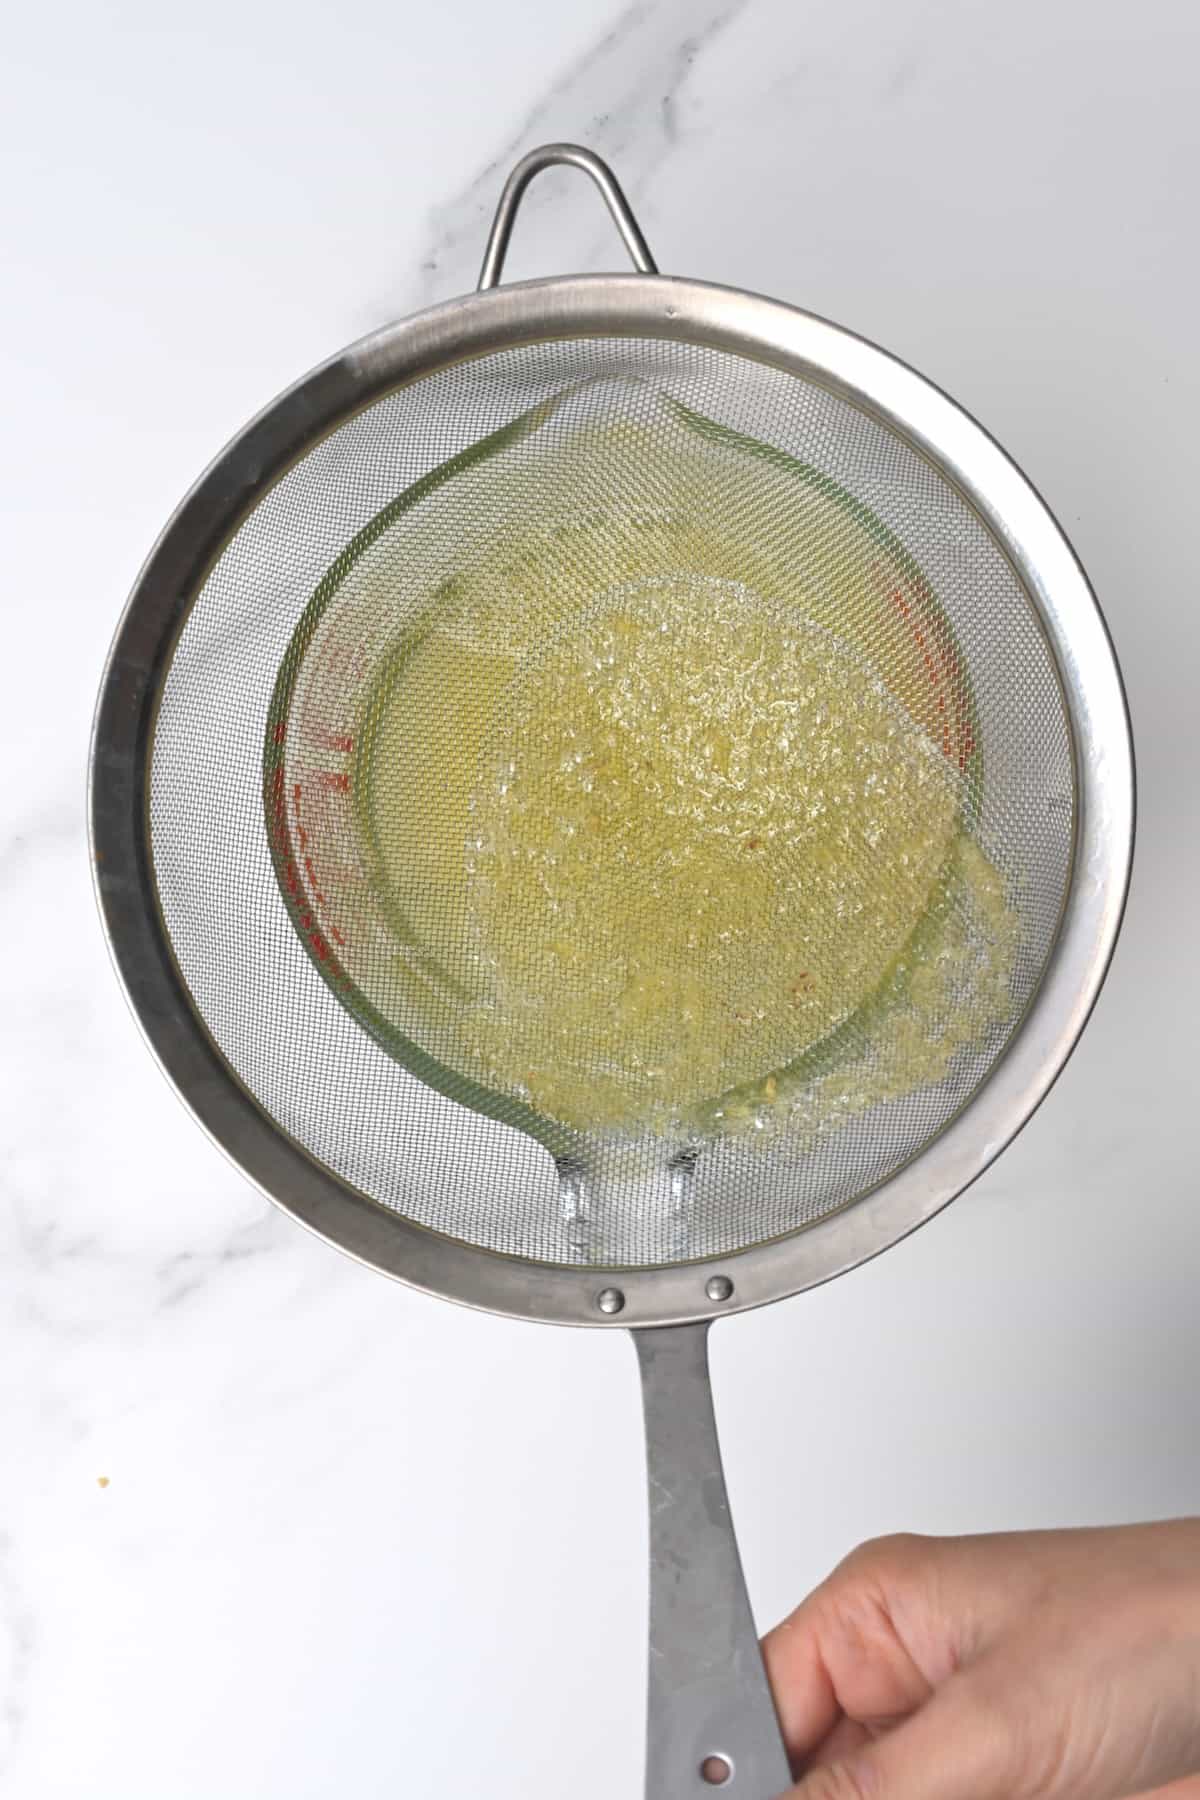 Sieving syrup to remove the lemon pulp